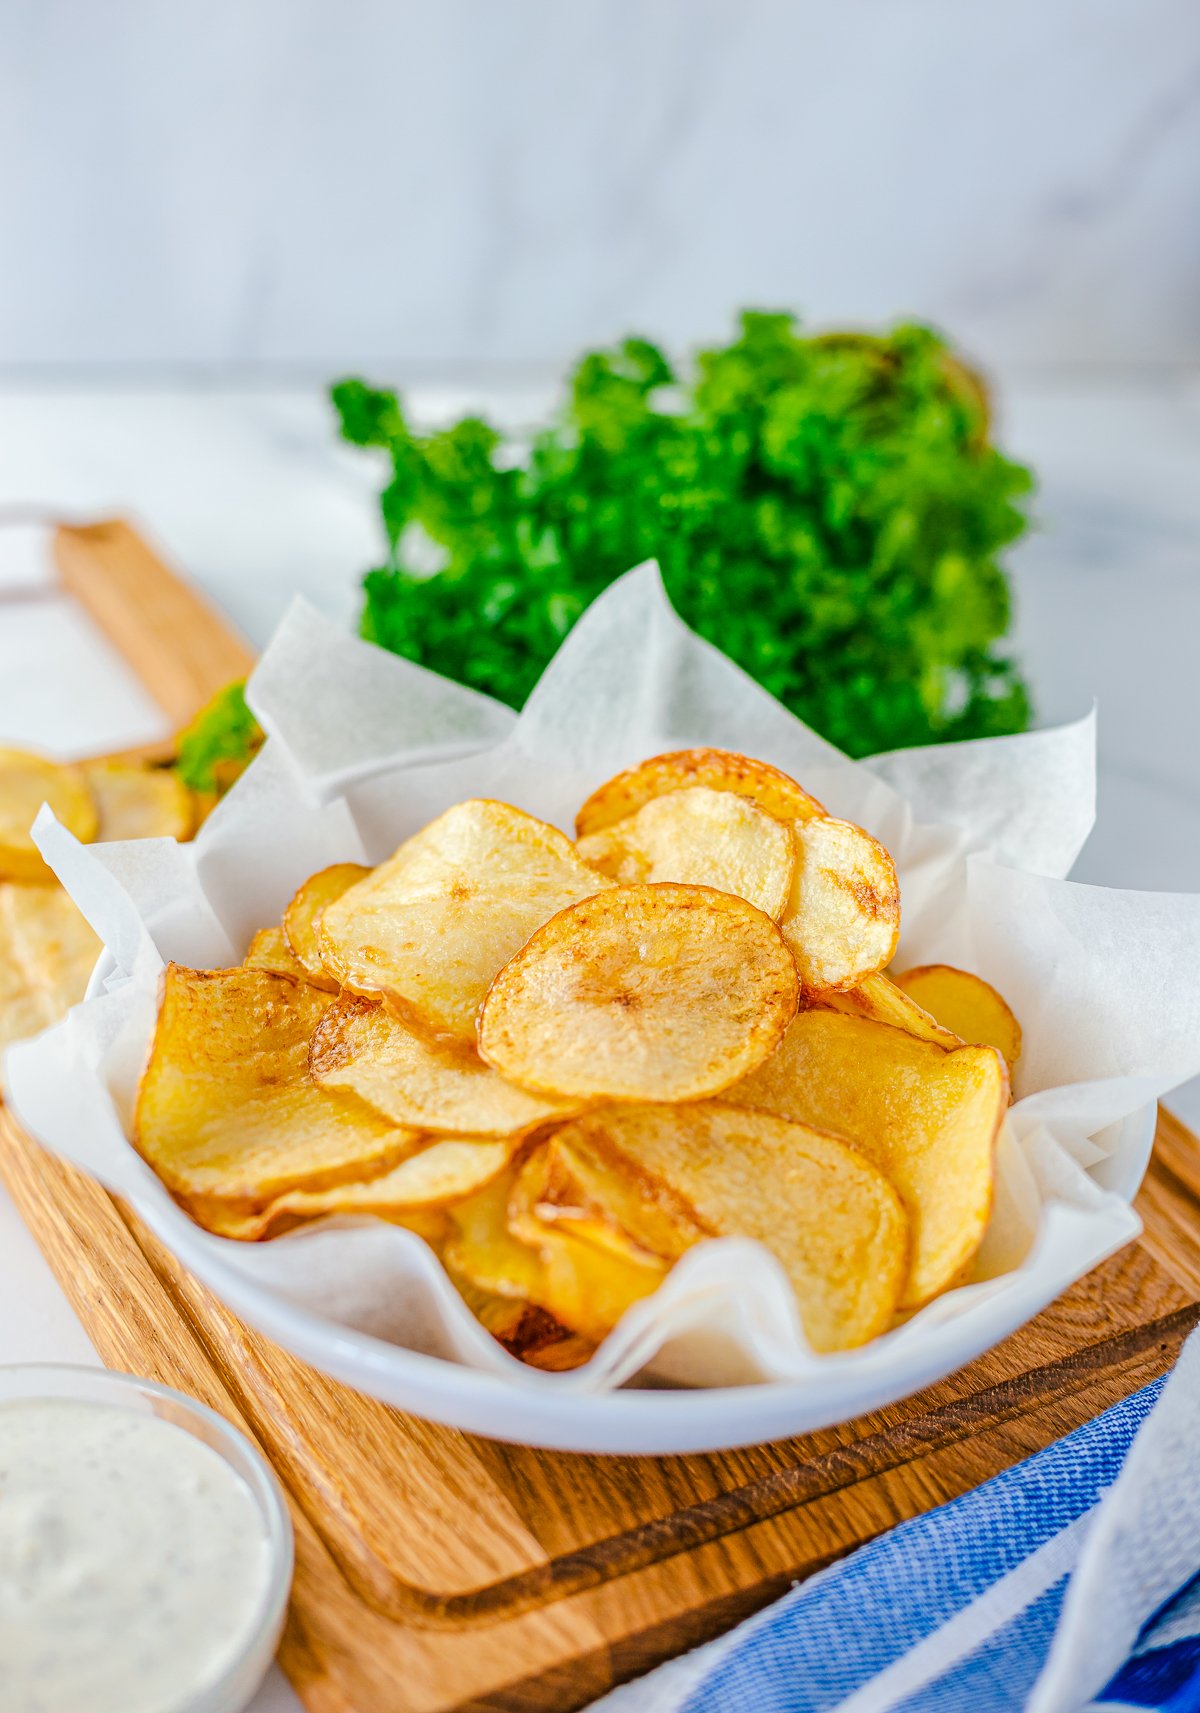 Finished Homemade Potato Chips in basket with parchment paper.